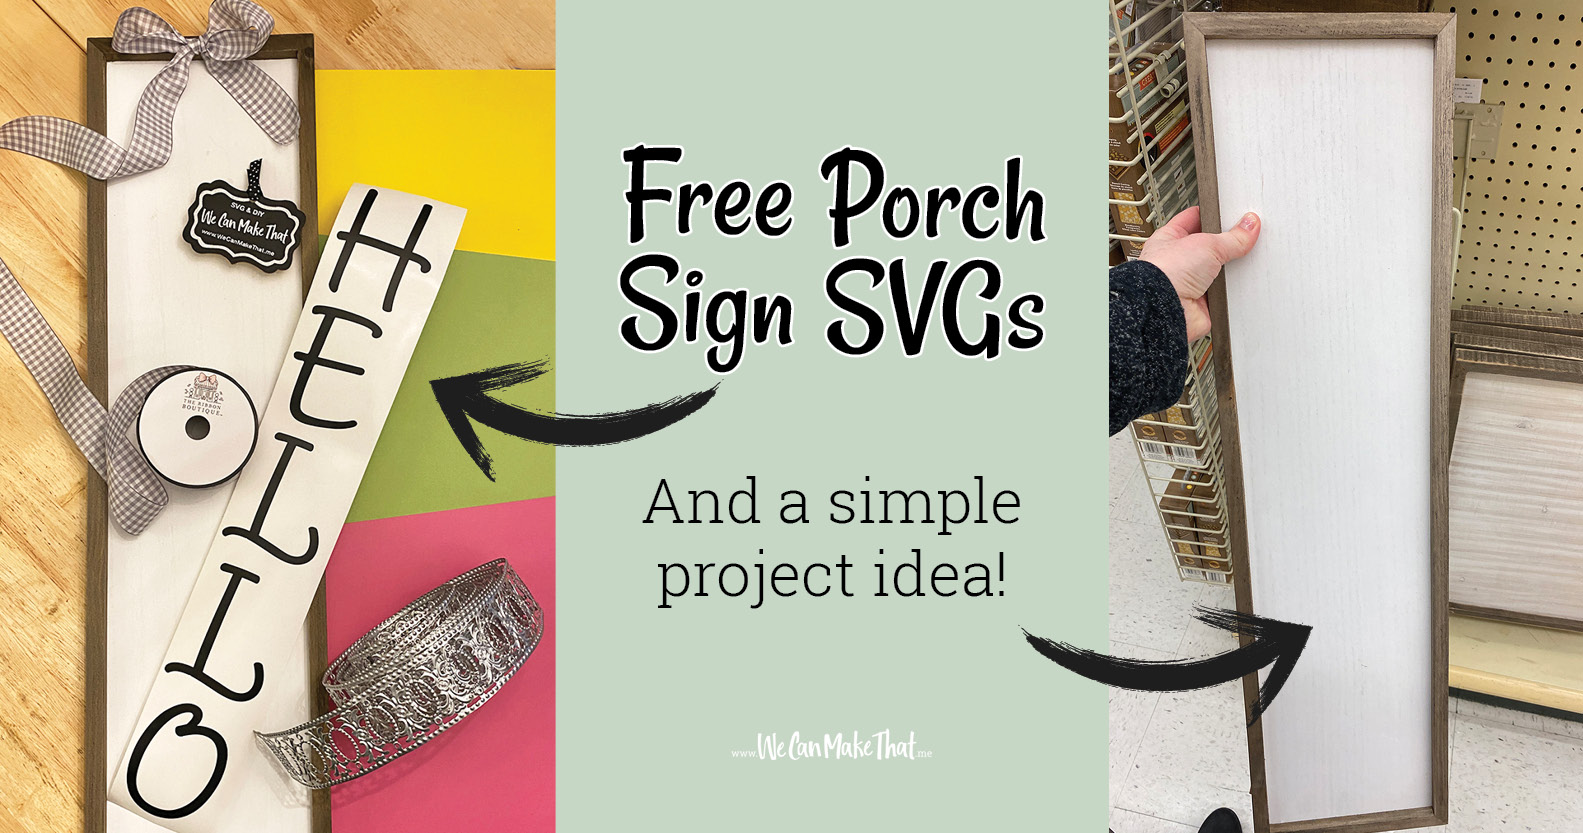 Free Porch Sign SVGs